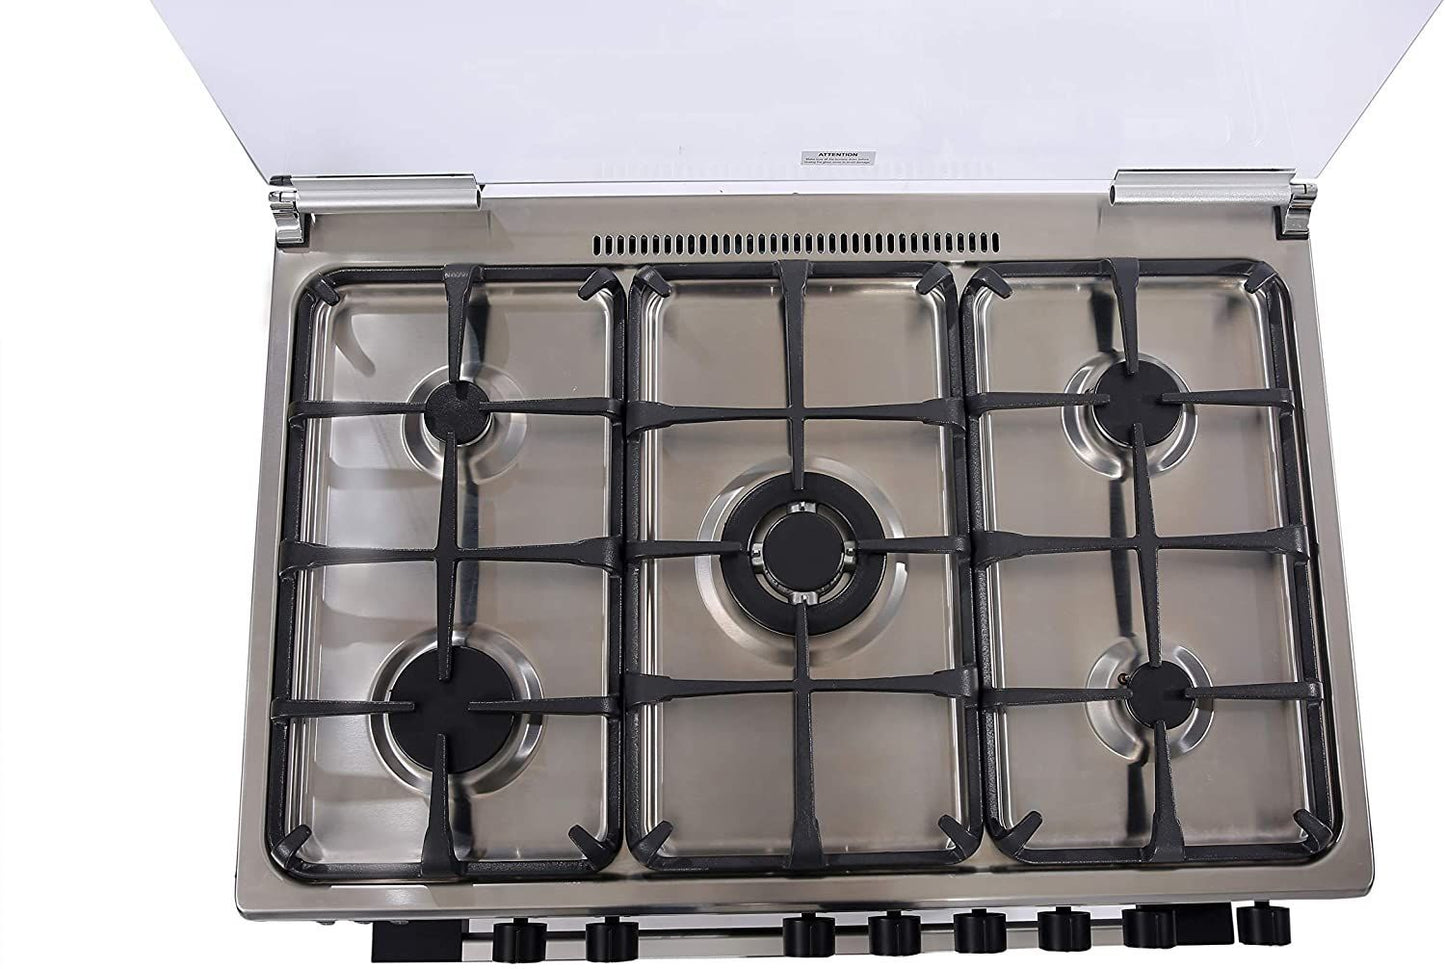 Midea 90*60cm Gas Cooker, Stainless Steel with Full Safety, LME95028FFD